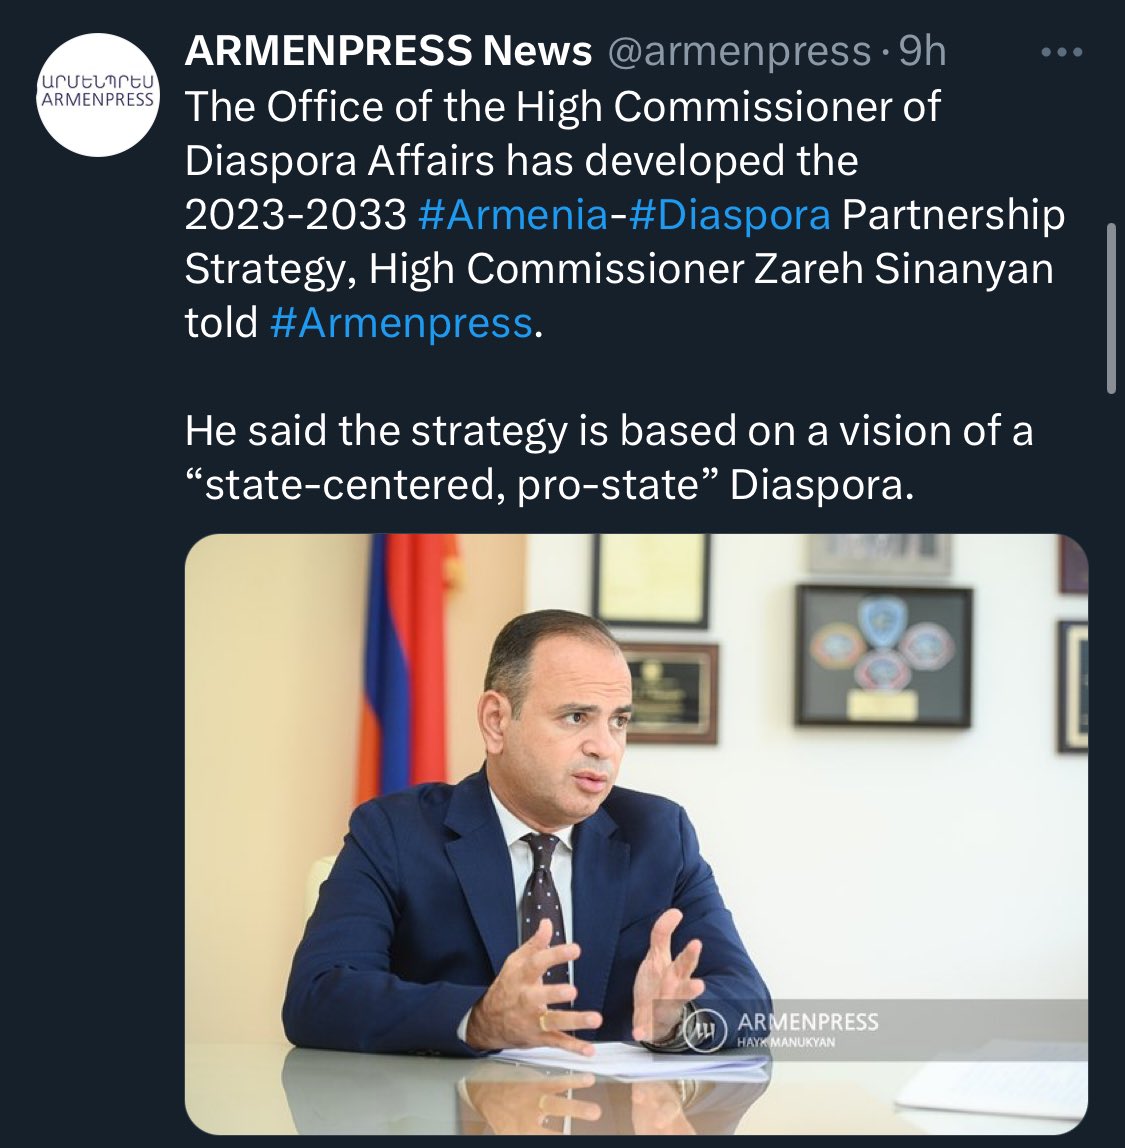 Yup. Too bad Artsakh fell outside of what they consider “the state.” That’s why a few weeks after the genocide they can blabber about the “Crossroads of Peace”™️ And they aren’t done redefining the state. That’s what a fresh constitution is for.